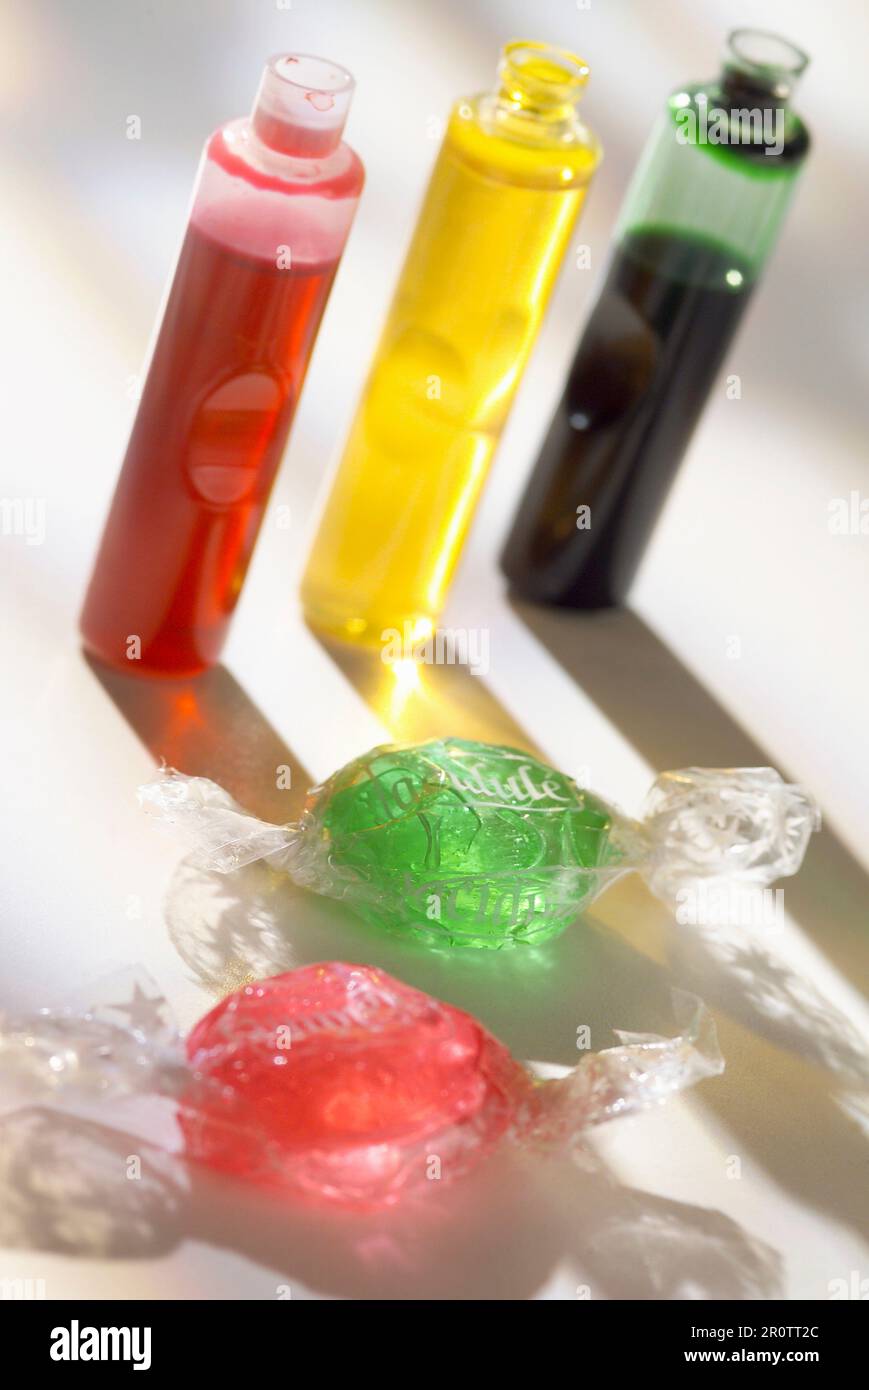 Food colorings and additives Stock Photo